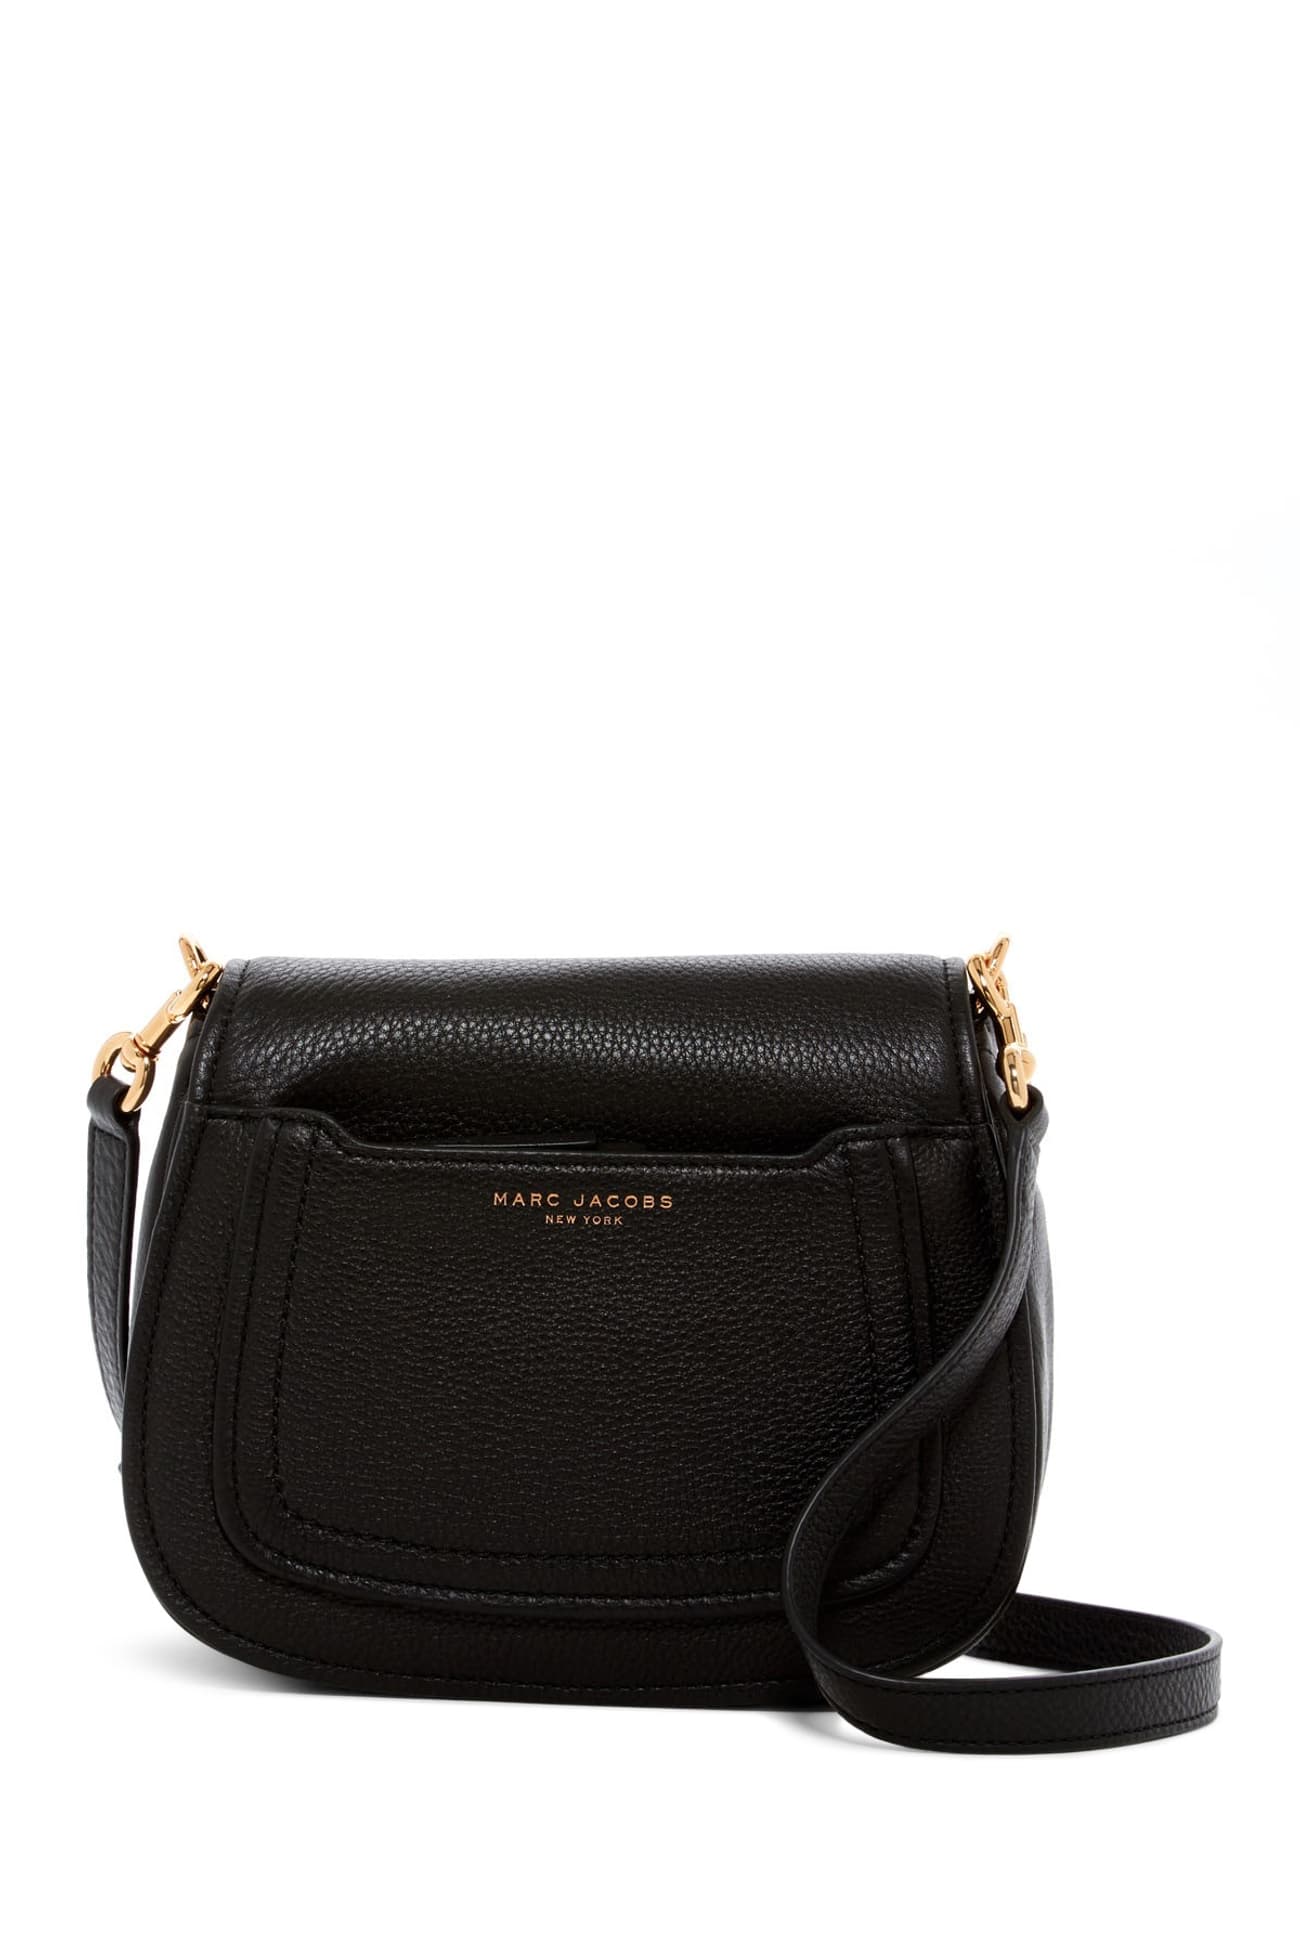 NWT Marc Jacobs Black Leather Empire City Wallet Crossbody Strap Bag MSRP  $275